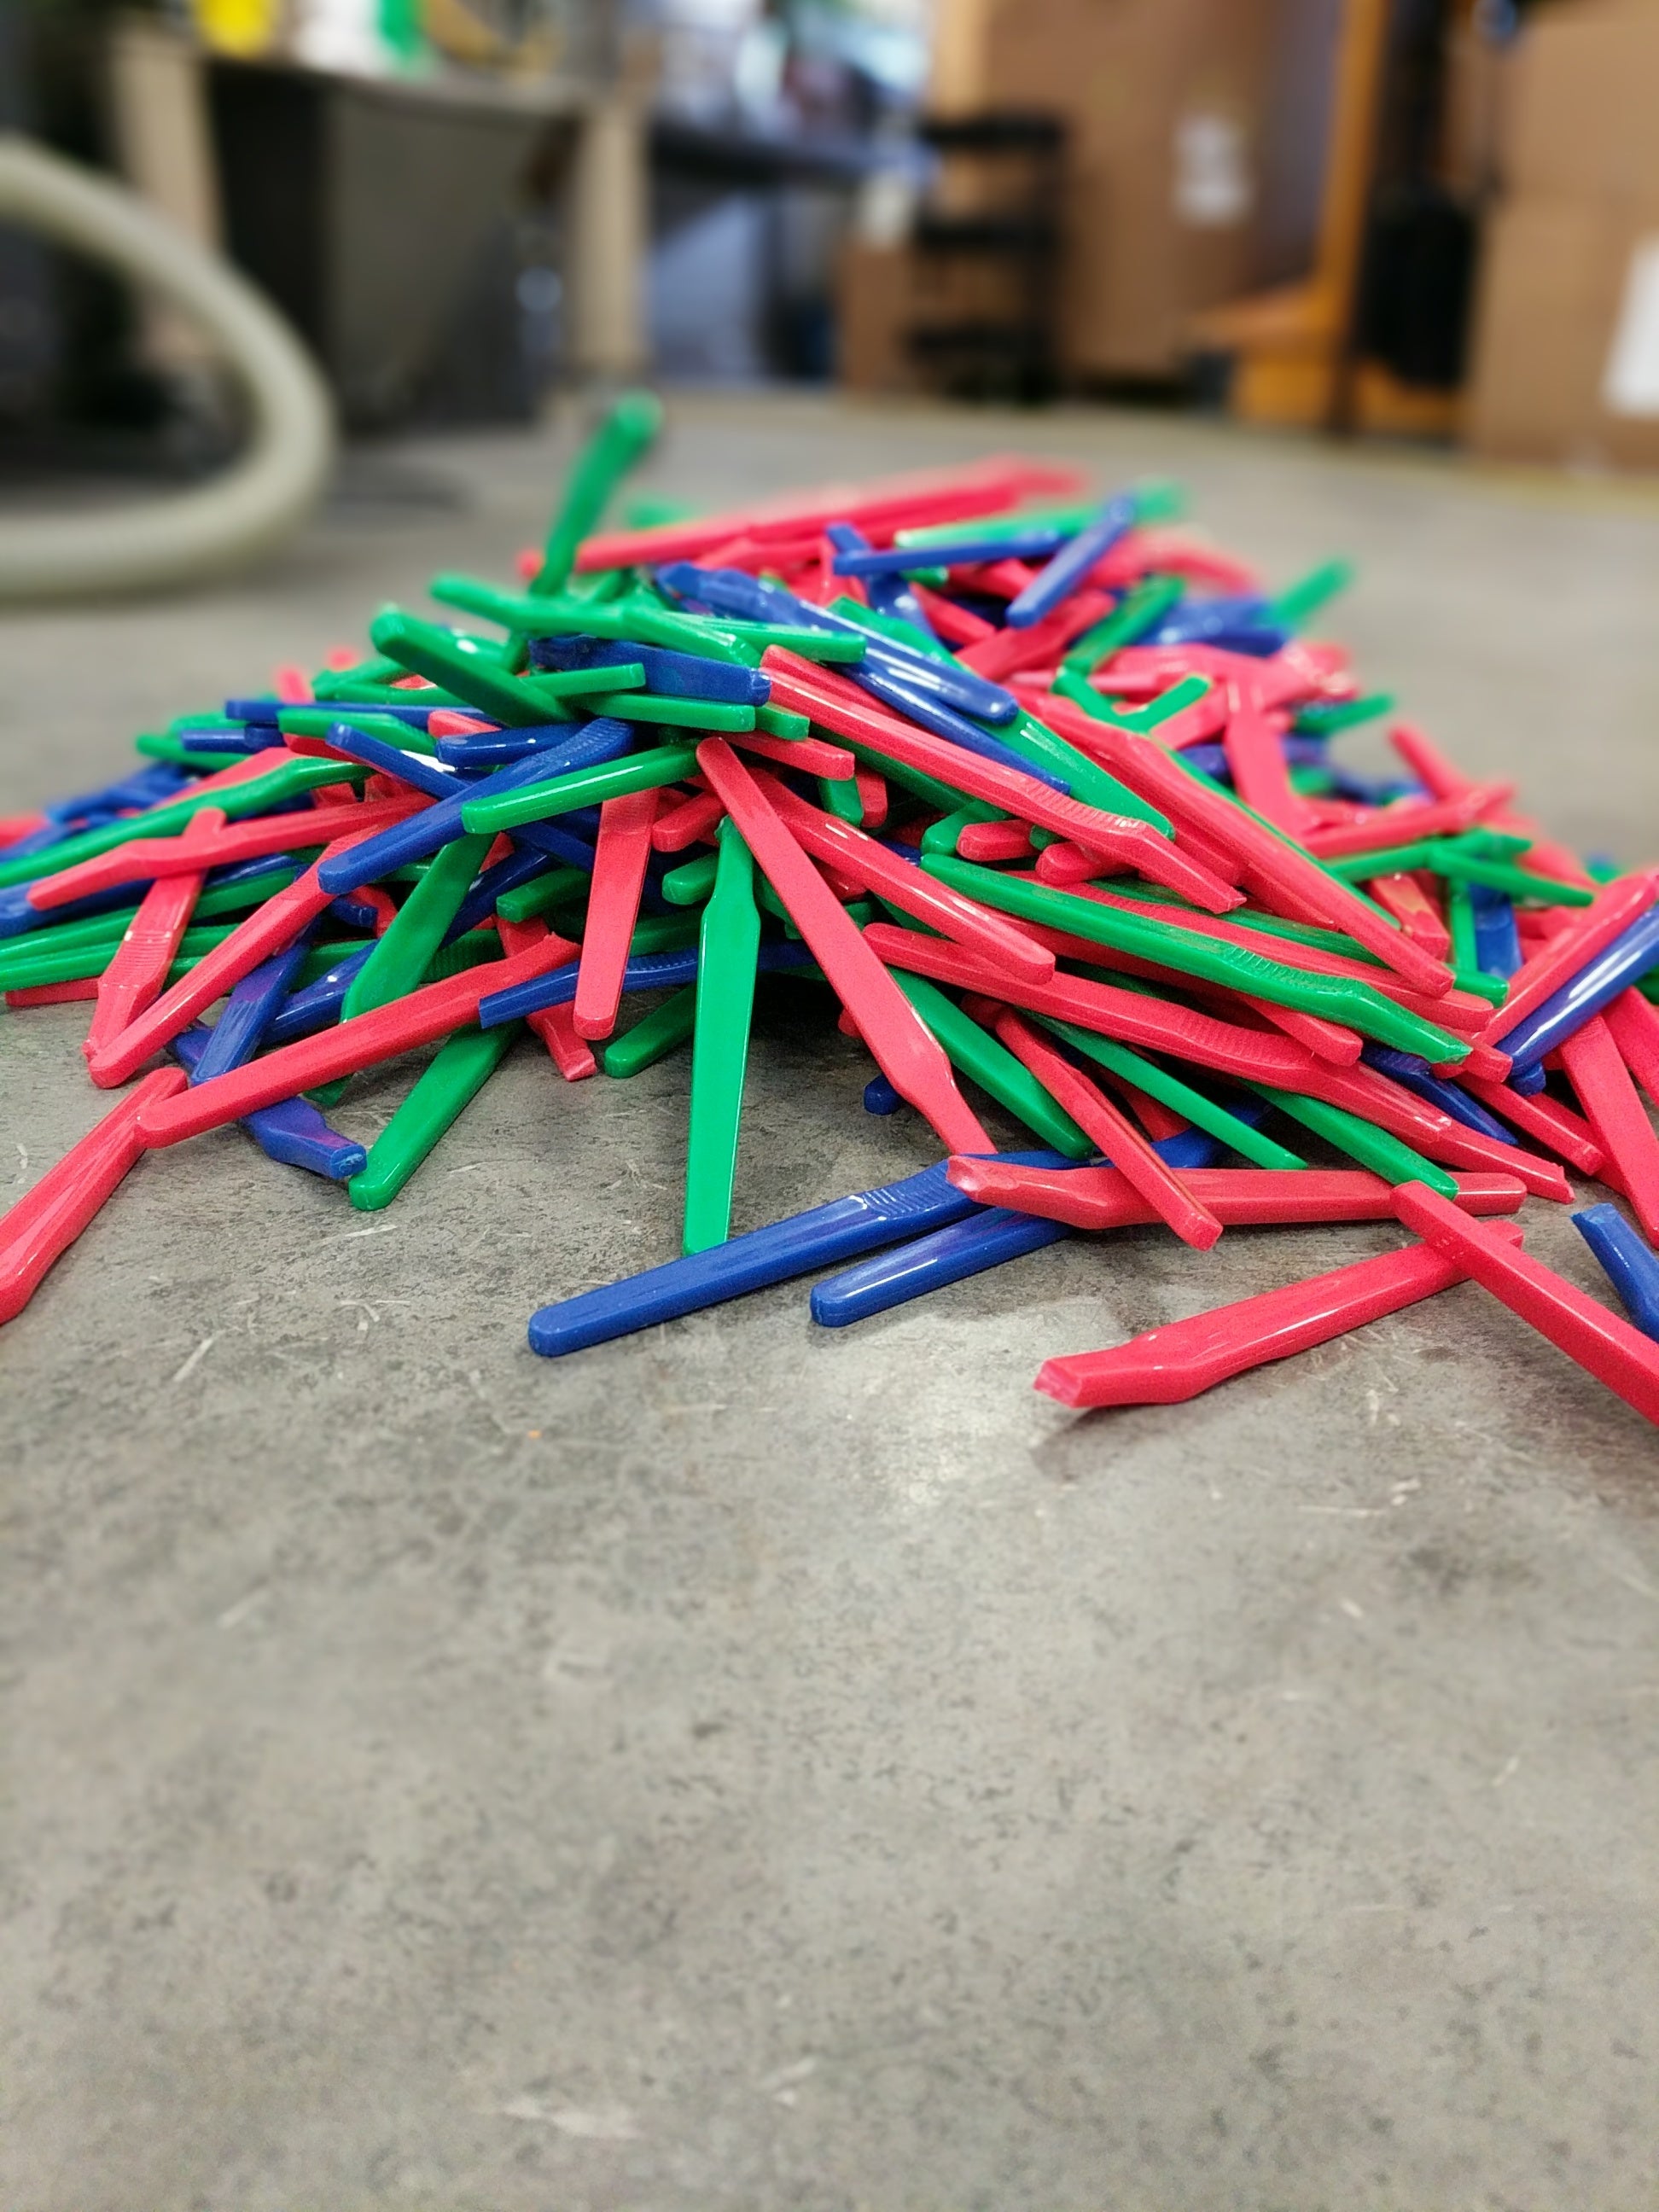 Making Filament from Toothbrushes